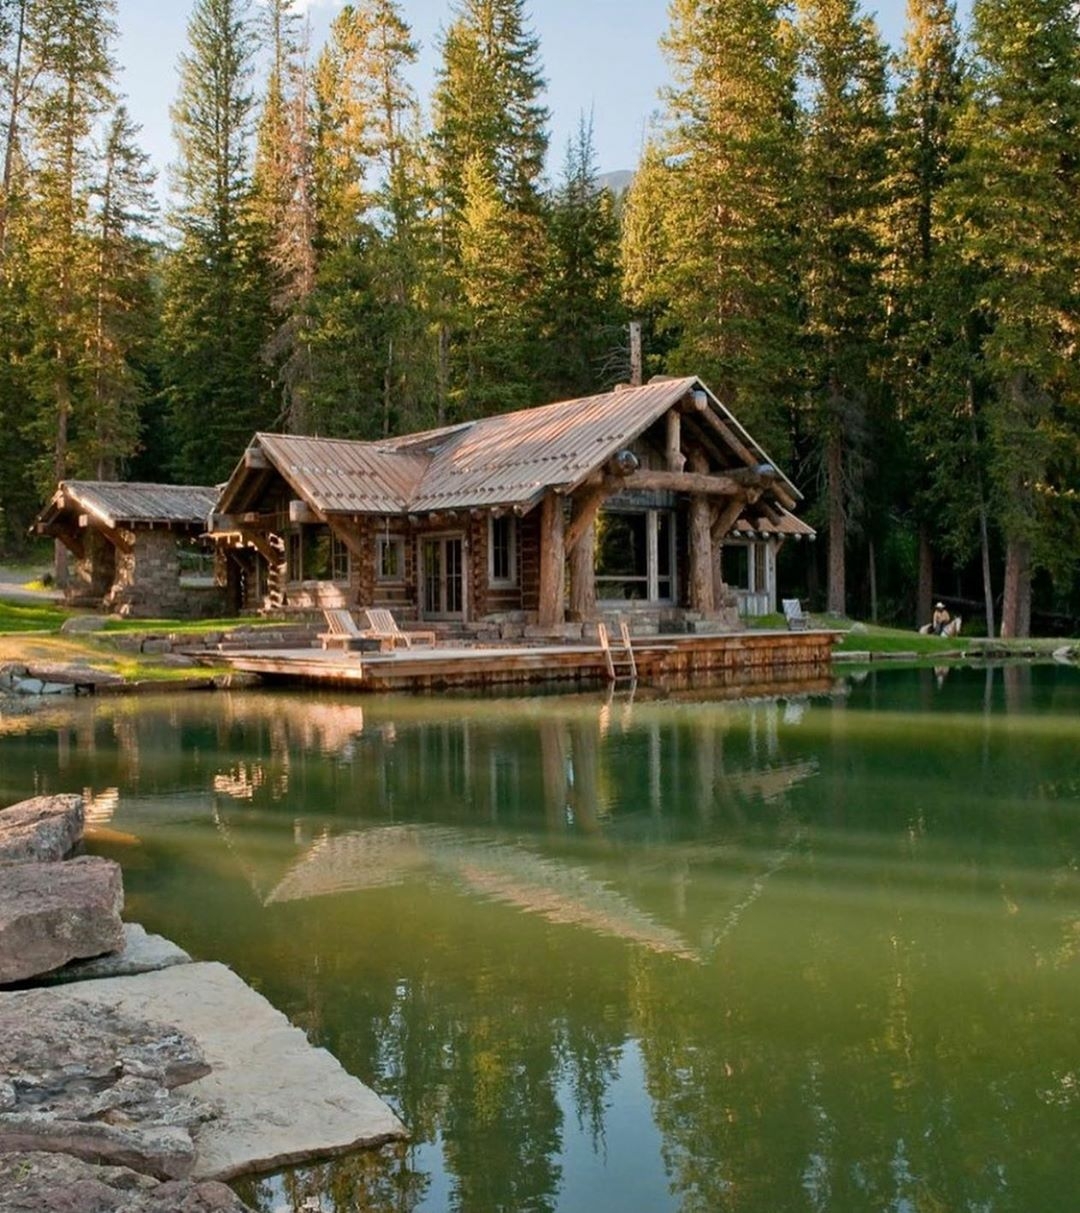 the manly life - cabin on the lake